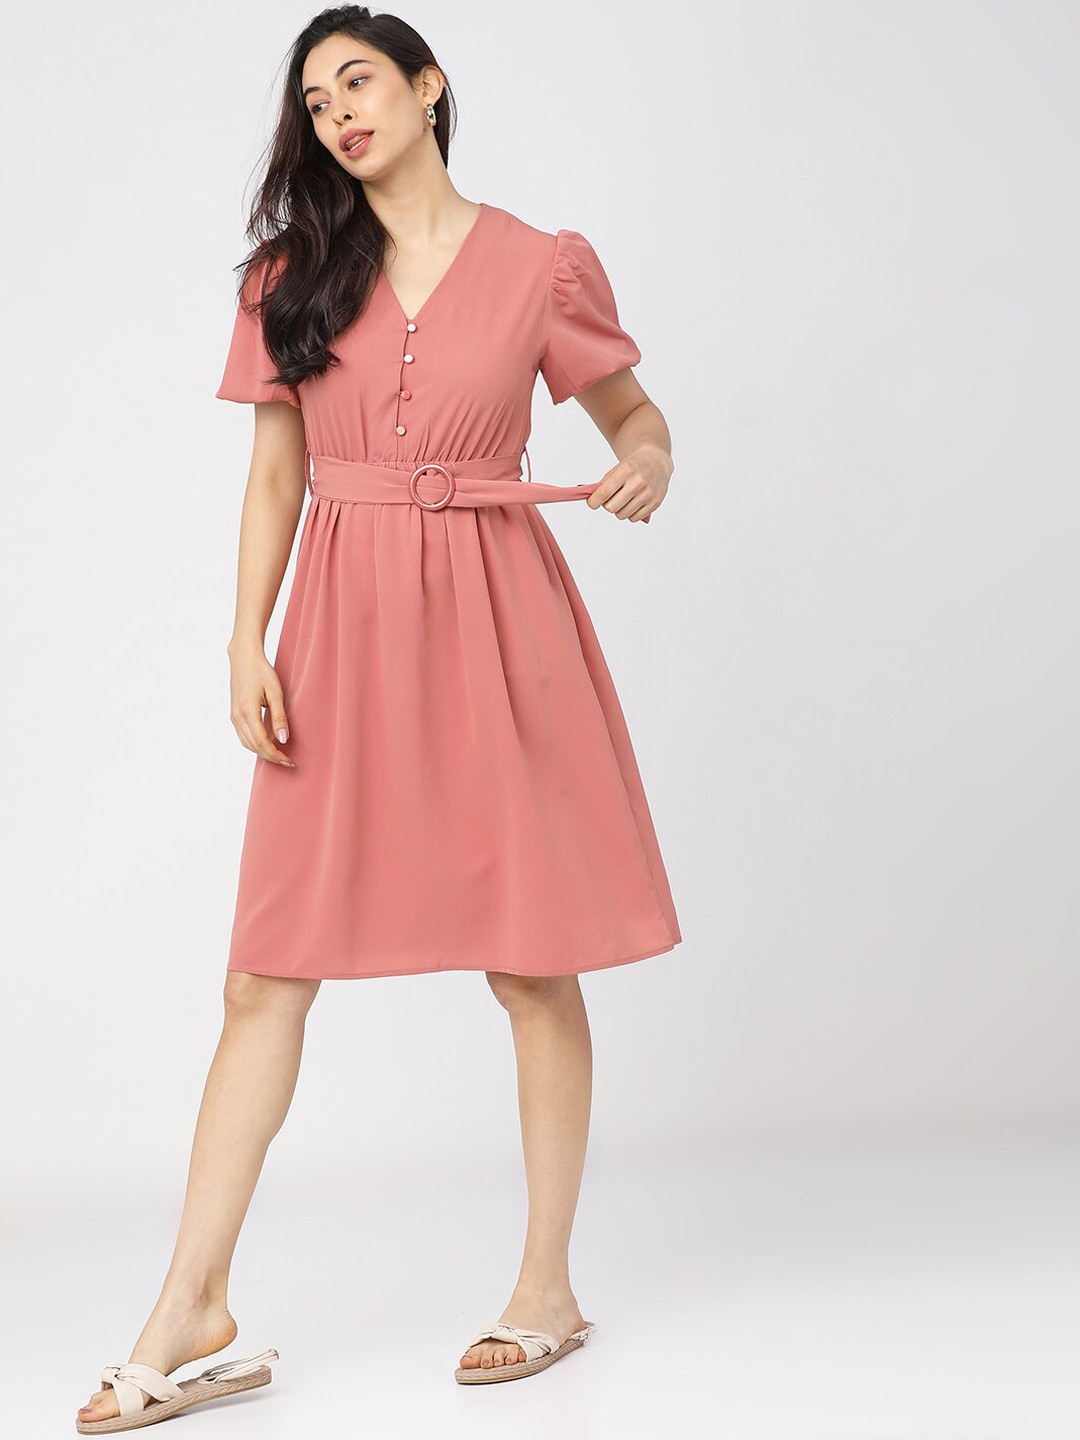 Tokyo Talkies Pink A-Line Dress Price in India